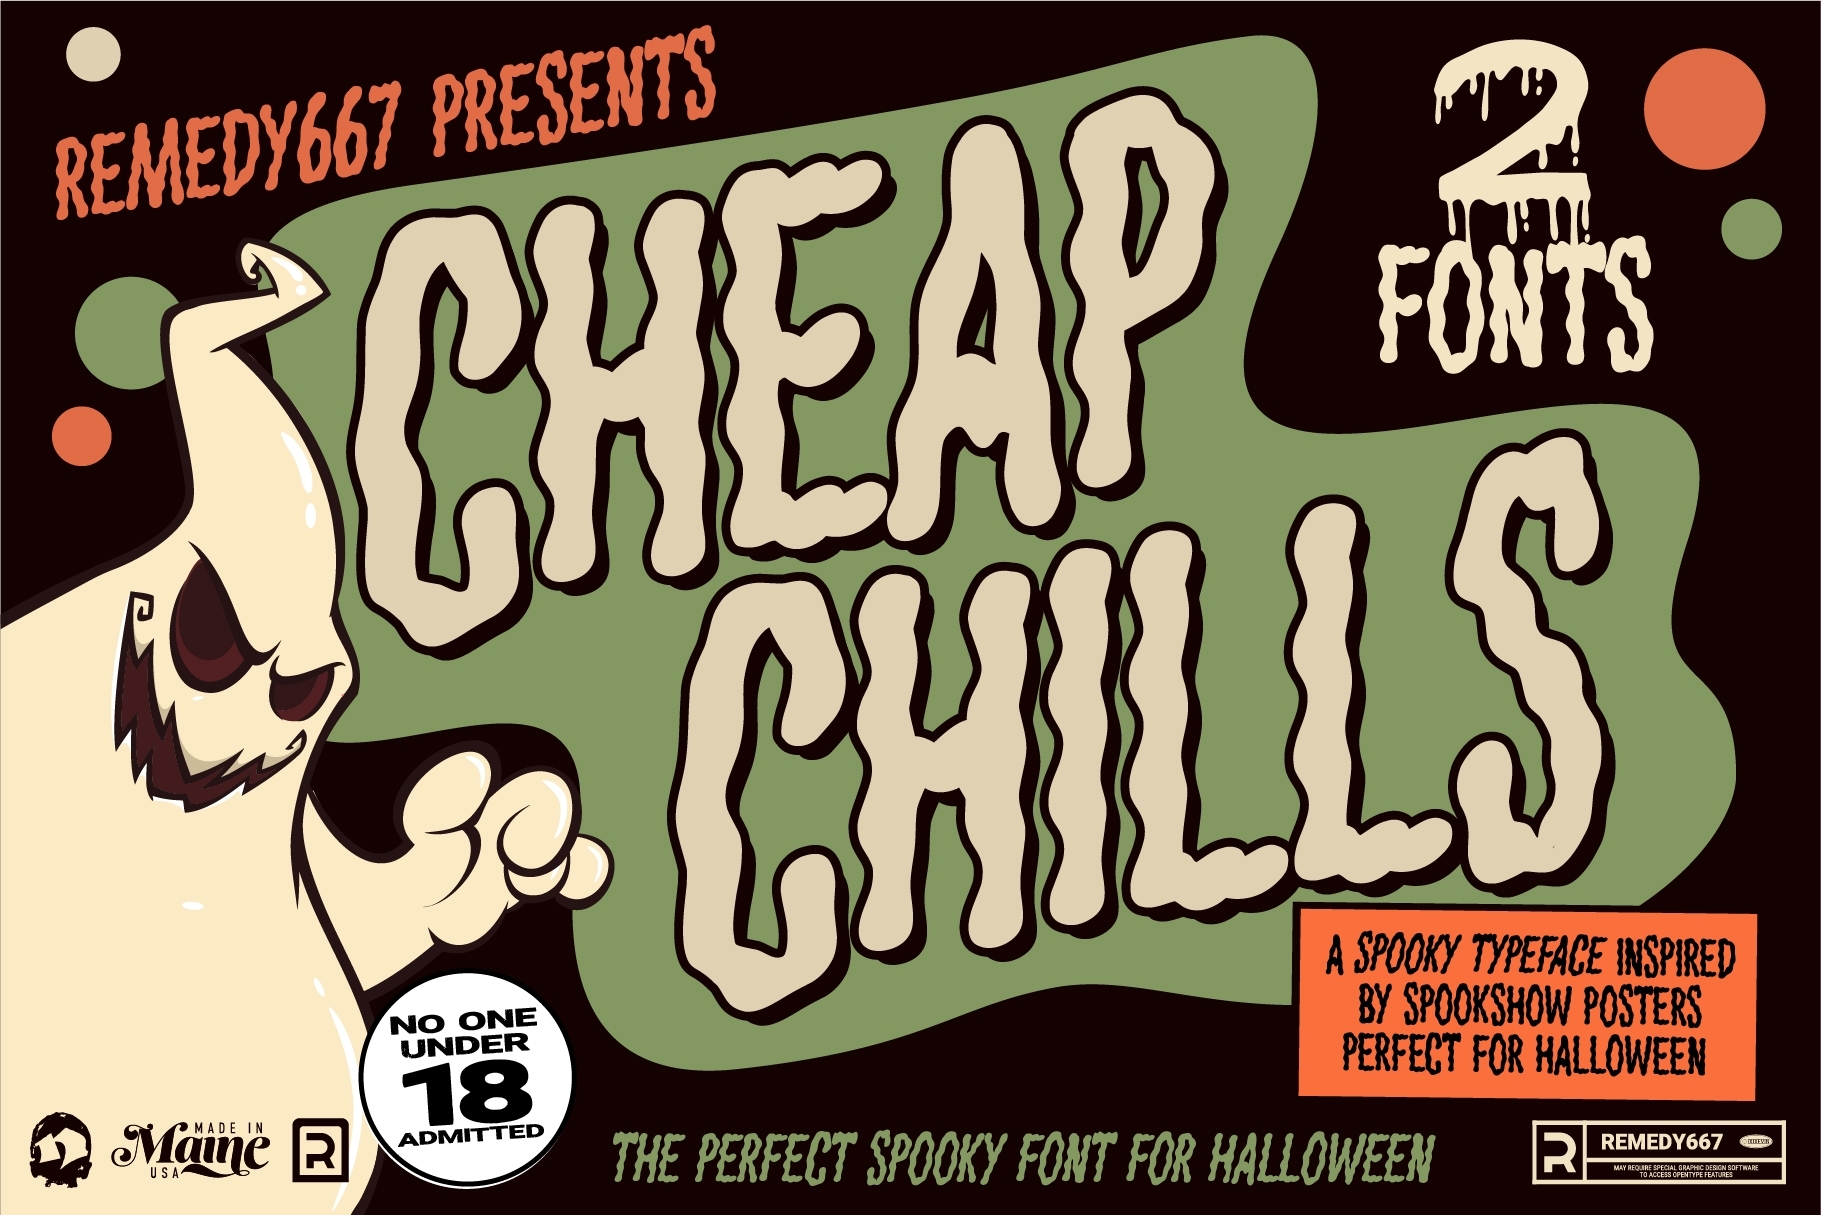 Remedy667 Cheap Chills Perfect Spooky Font for Halloween inspired by Spookshow Posters